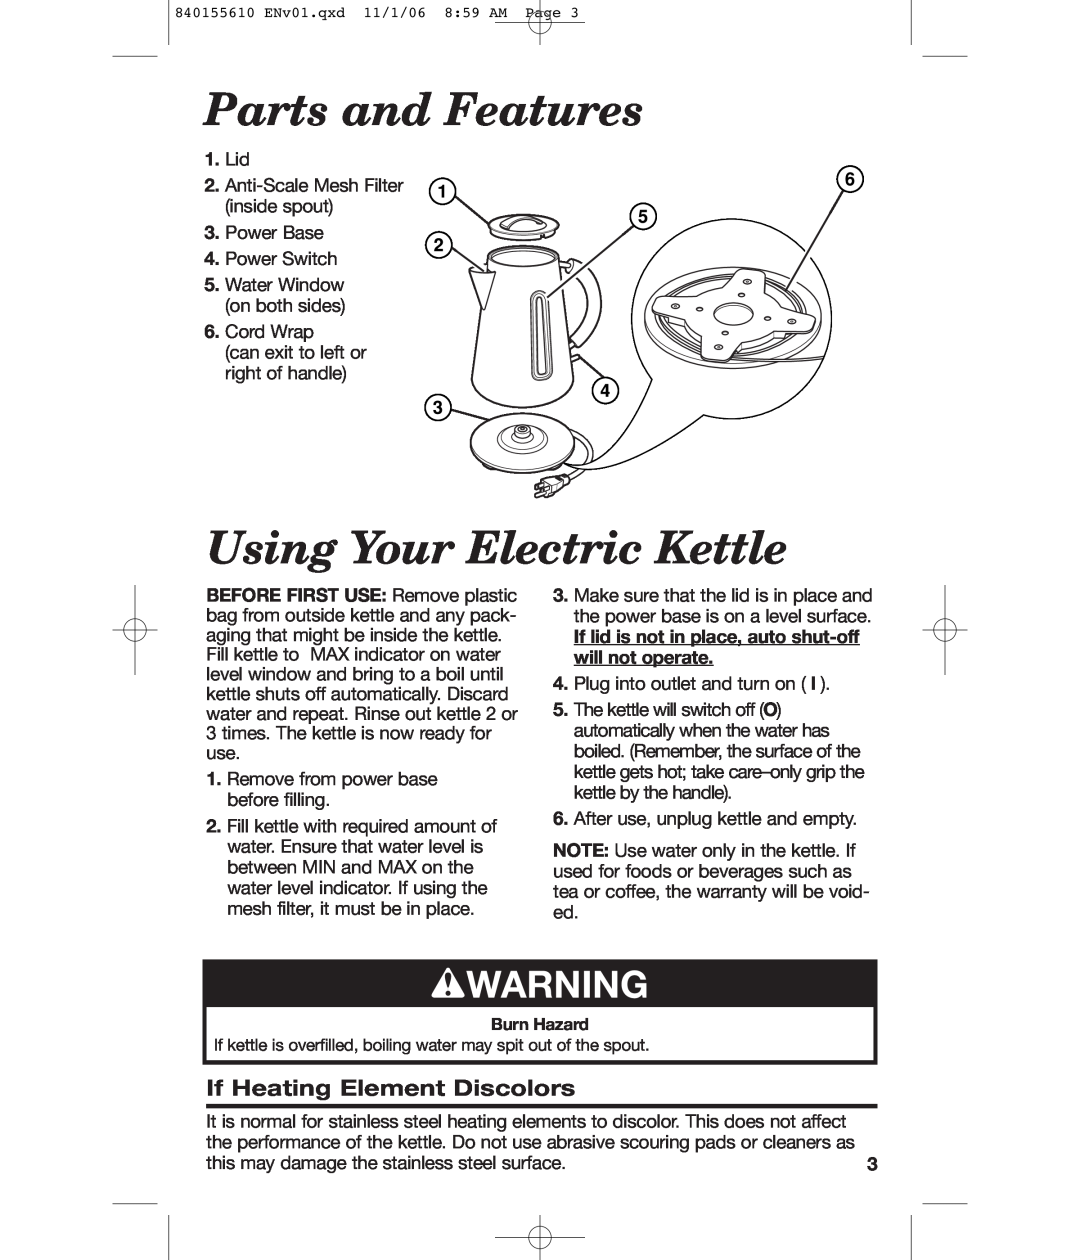 Hamilton Beach 840155610 manual Parts and Features, Using Your Electric Kettle, If Heating Element Discolors, wWARNING 